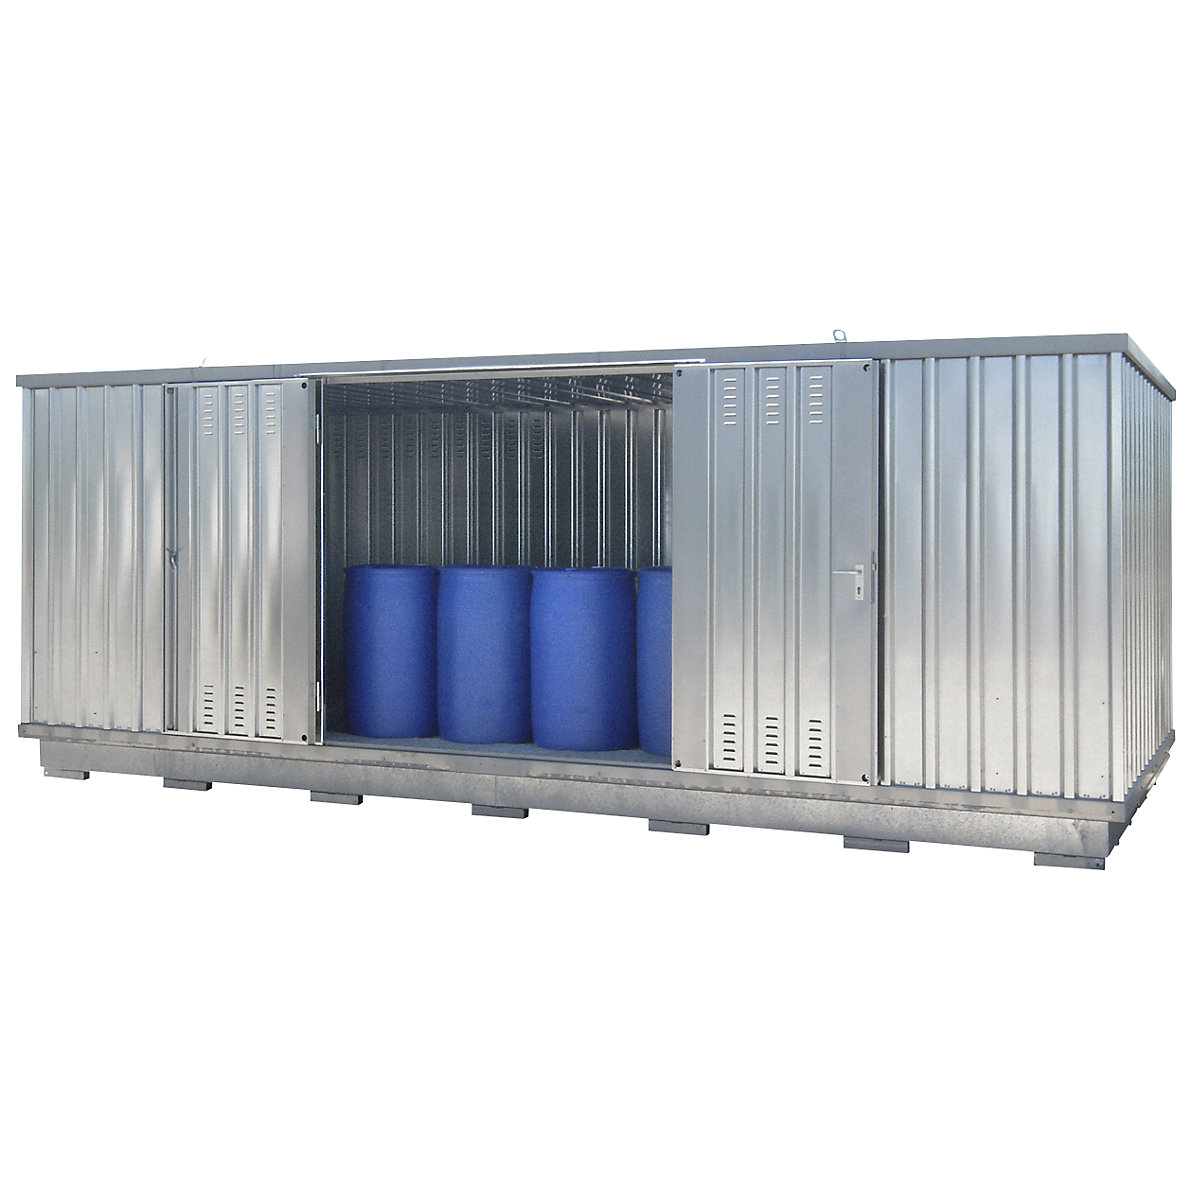 Hazardous goods container also for the active storage of flammable media - LaCont